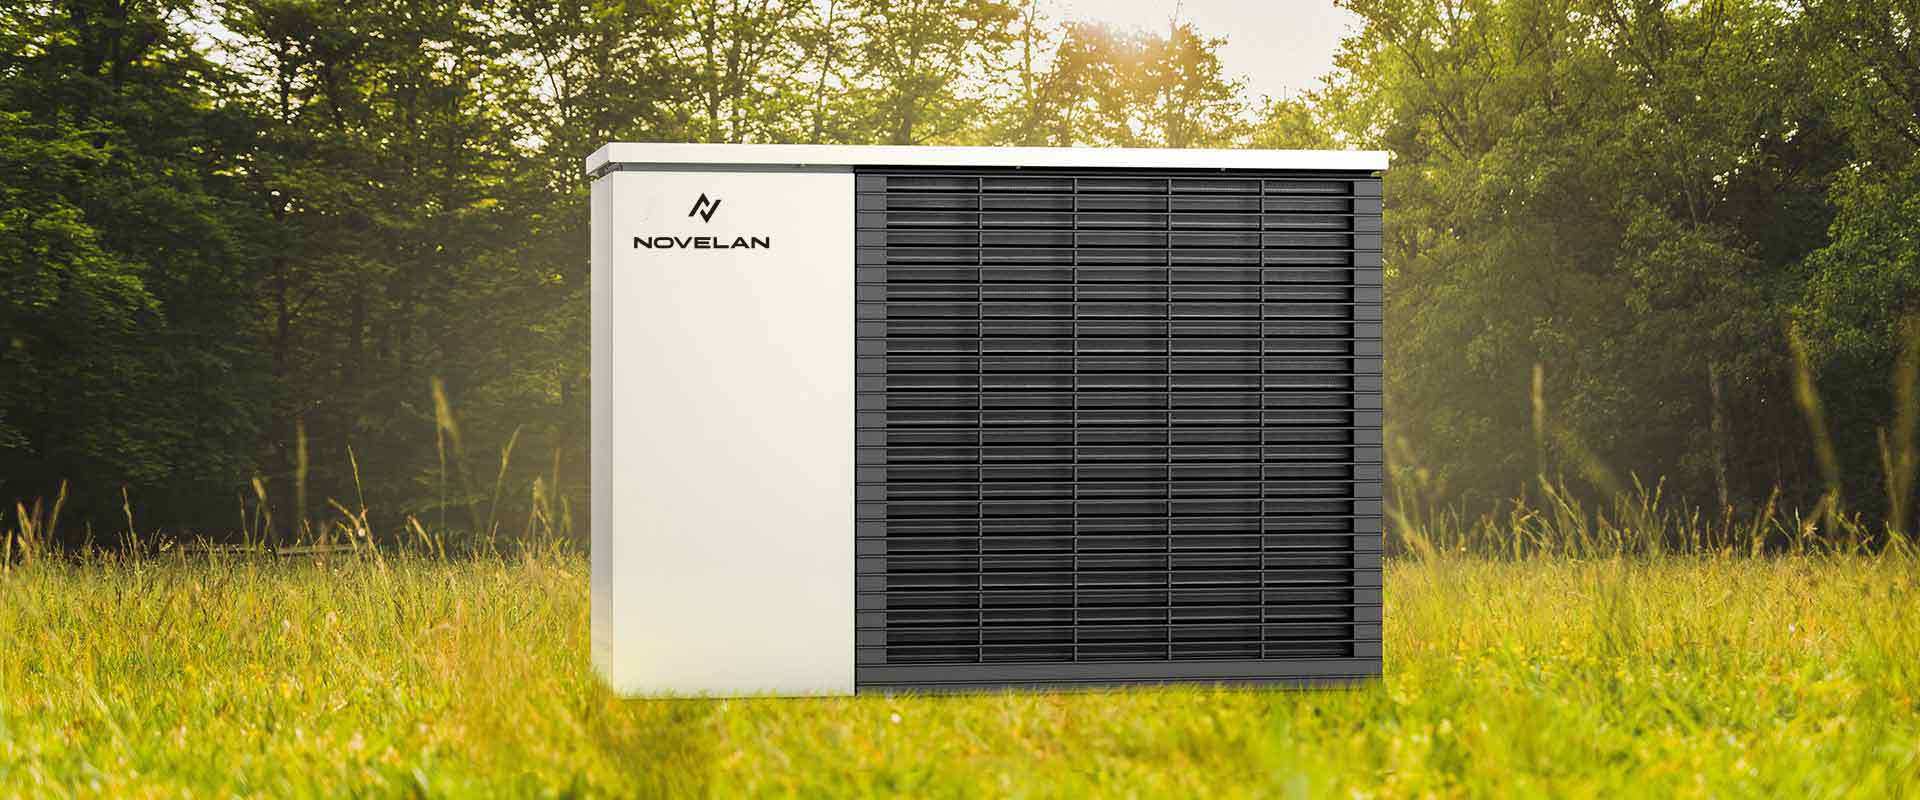 The air/water-heat pump LADV can be seen with a ventilation grille on the right front and the NOVELAN logo in the upper left corner as it stands on a pasture with a forest in the background.